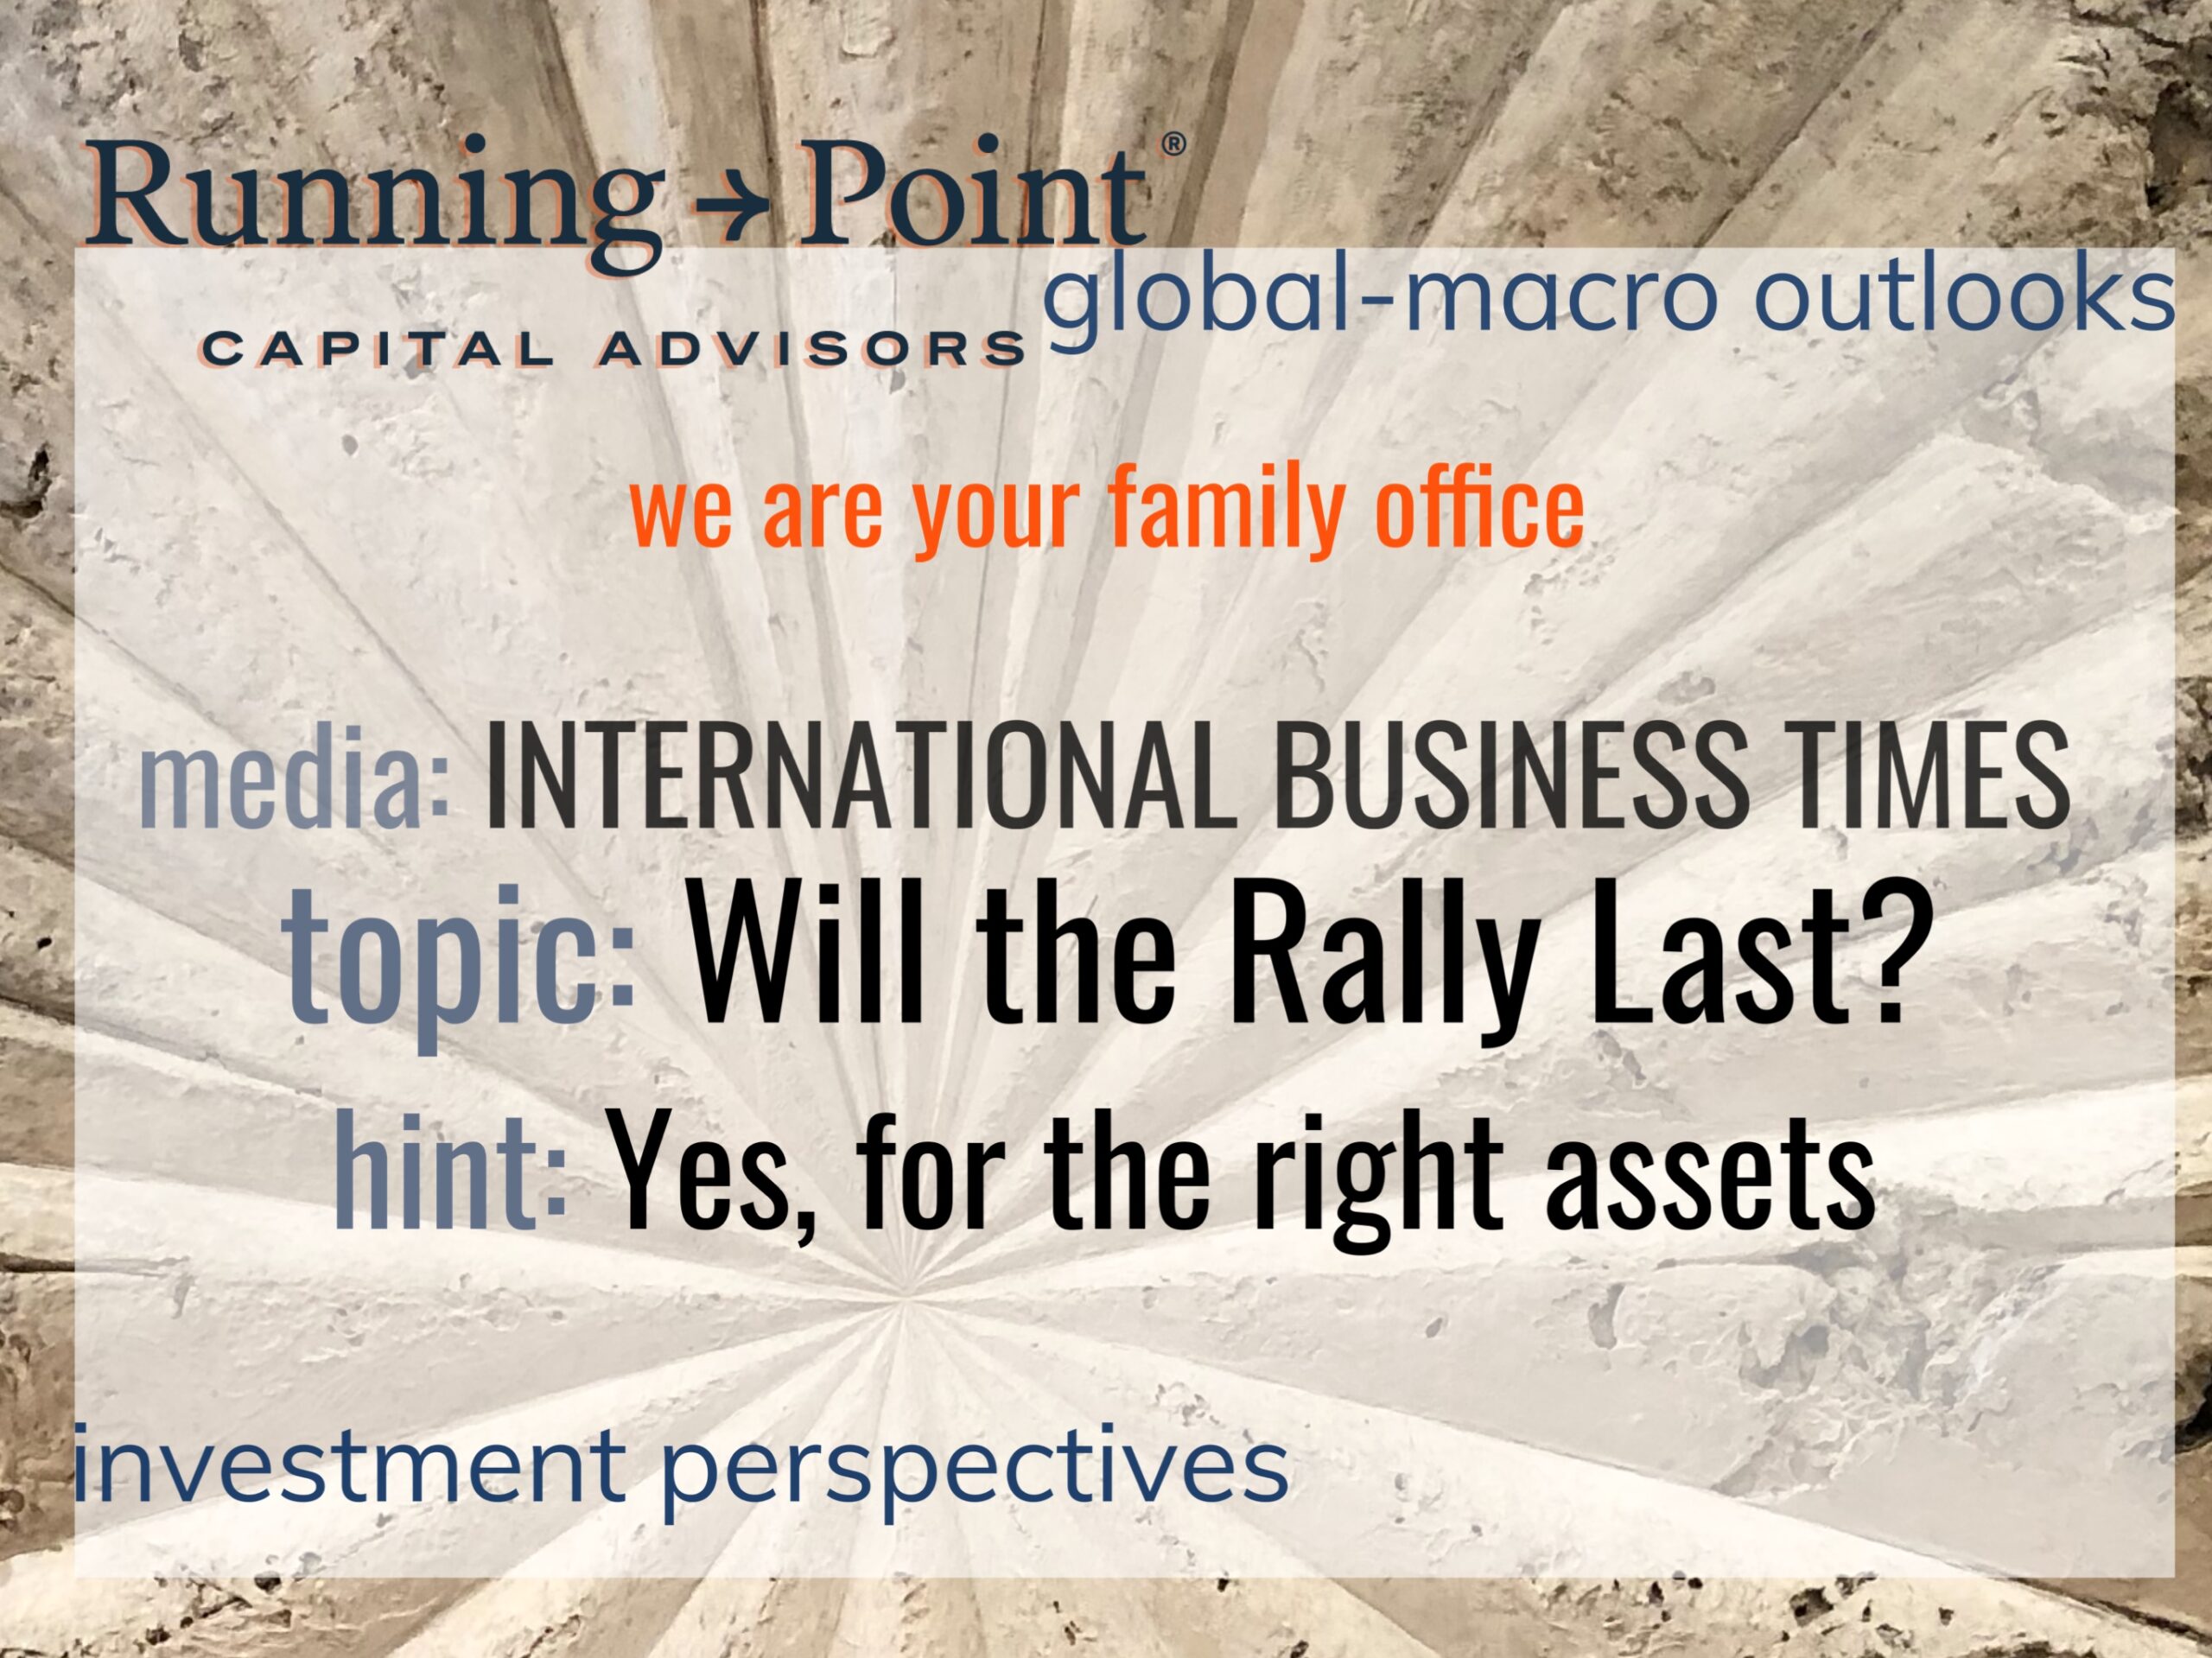 International Business Times: Will the Rally Last?